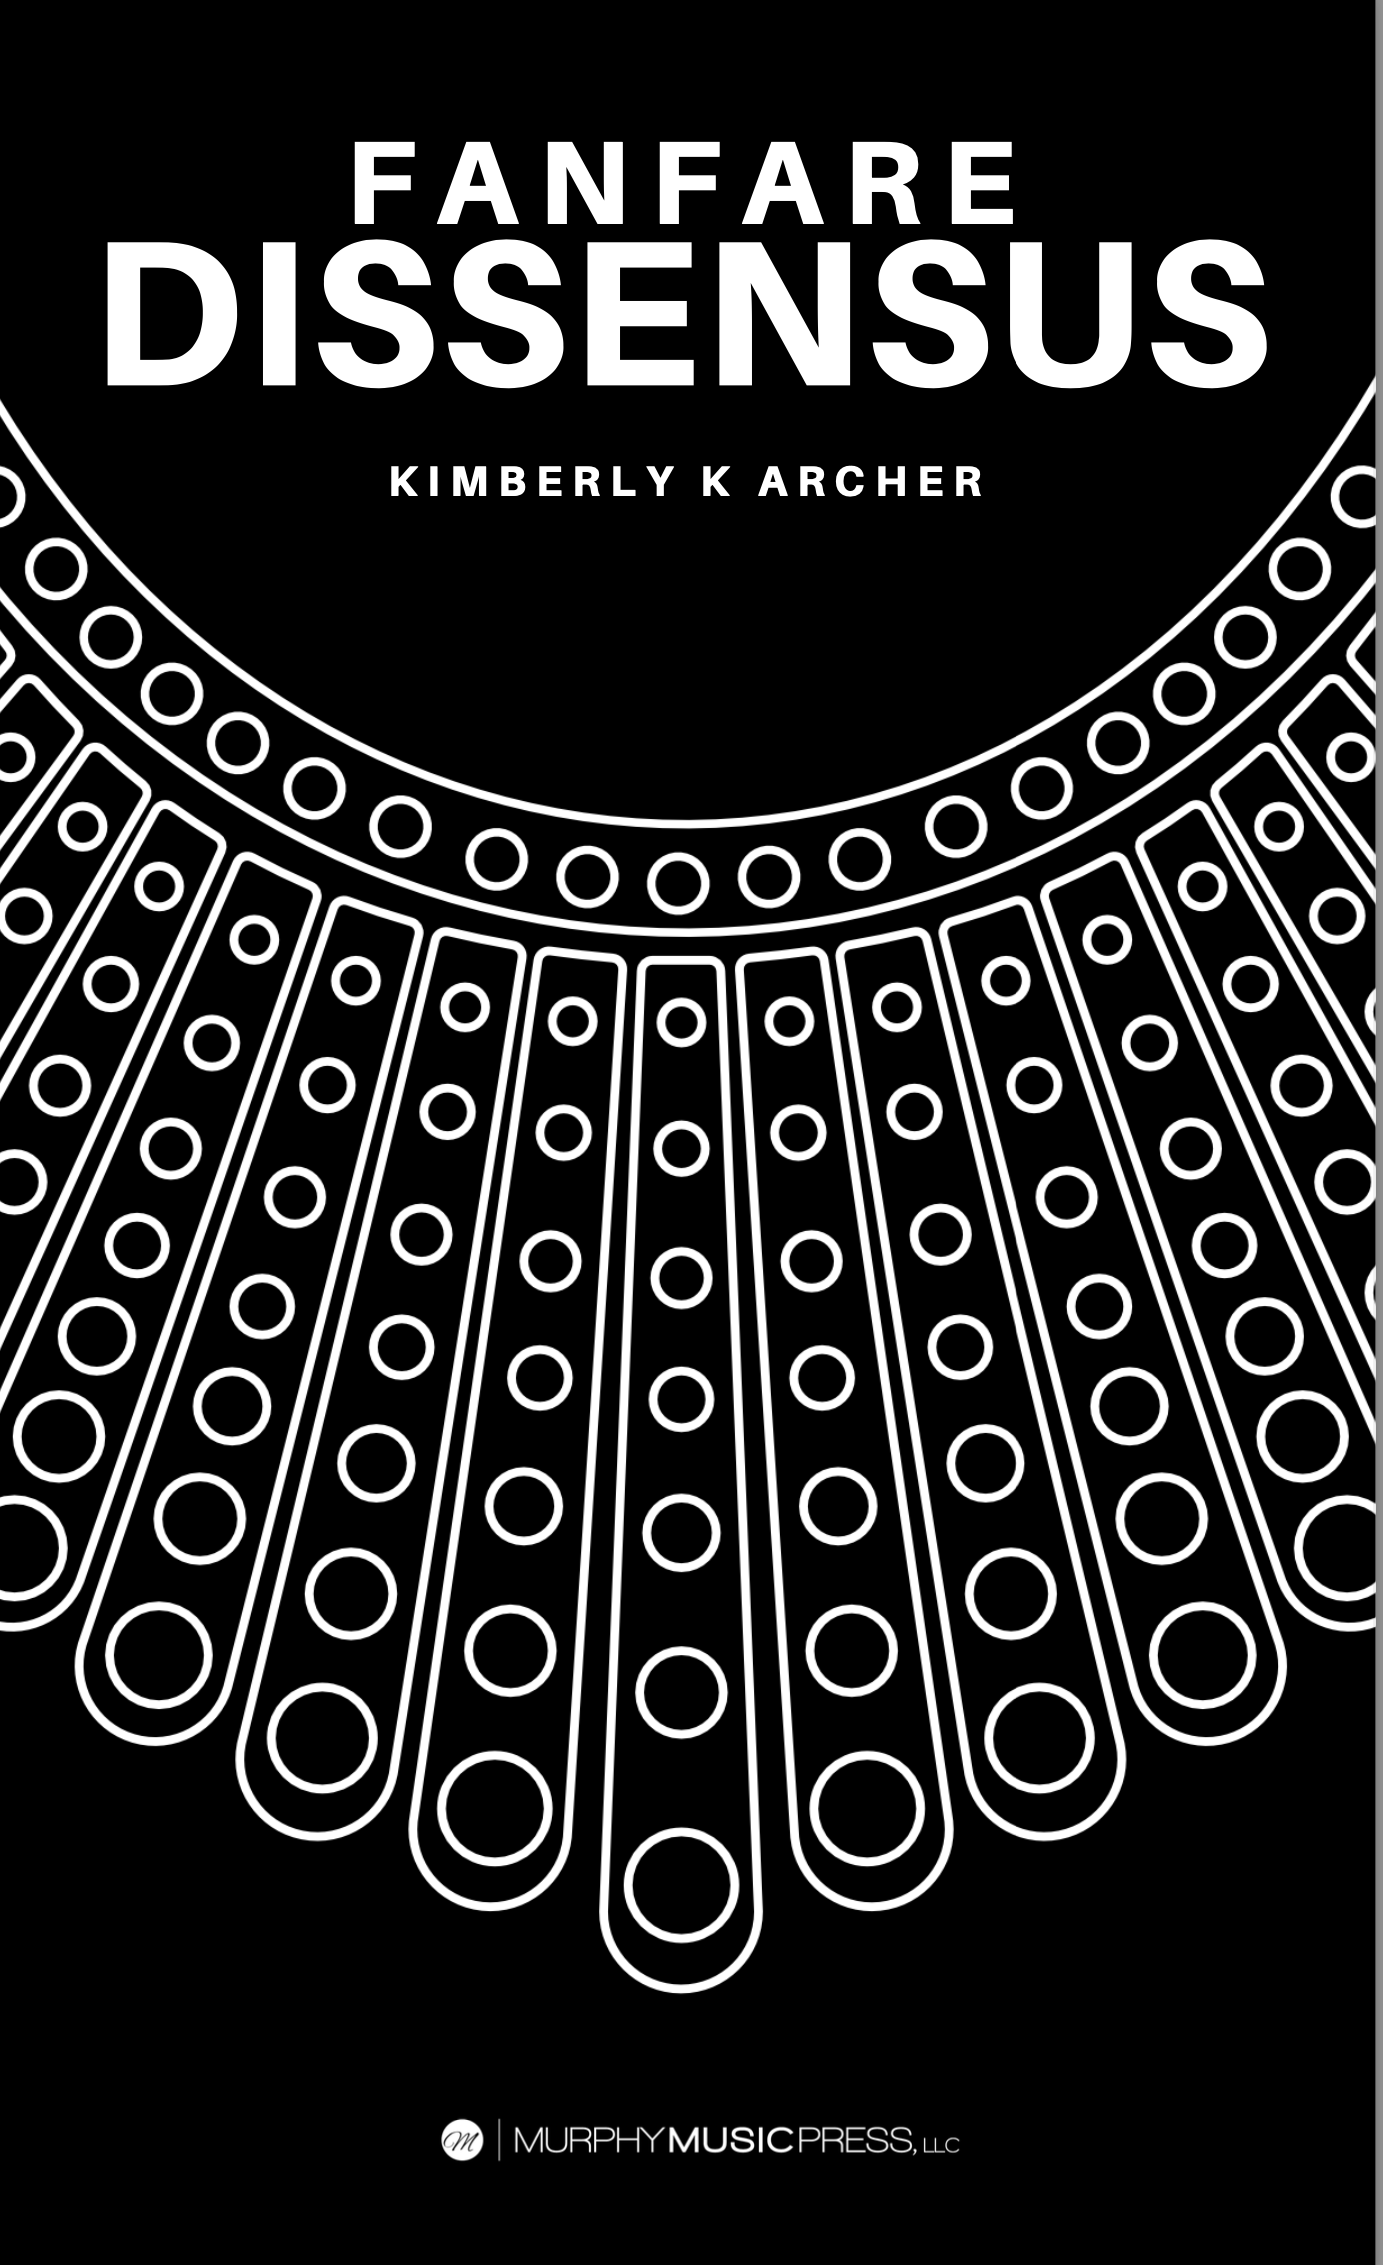 Fanfare Dissensus by Kimberly Archer